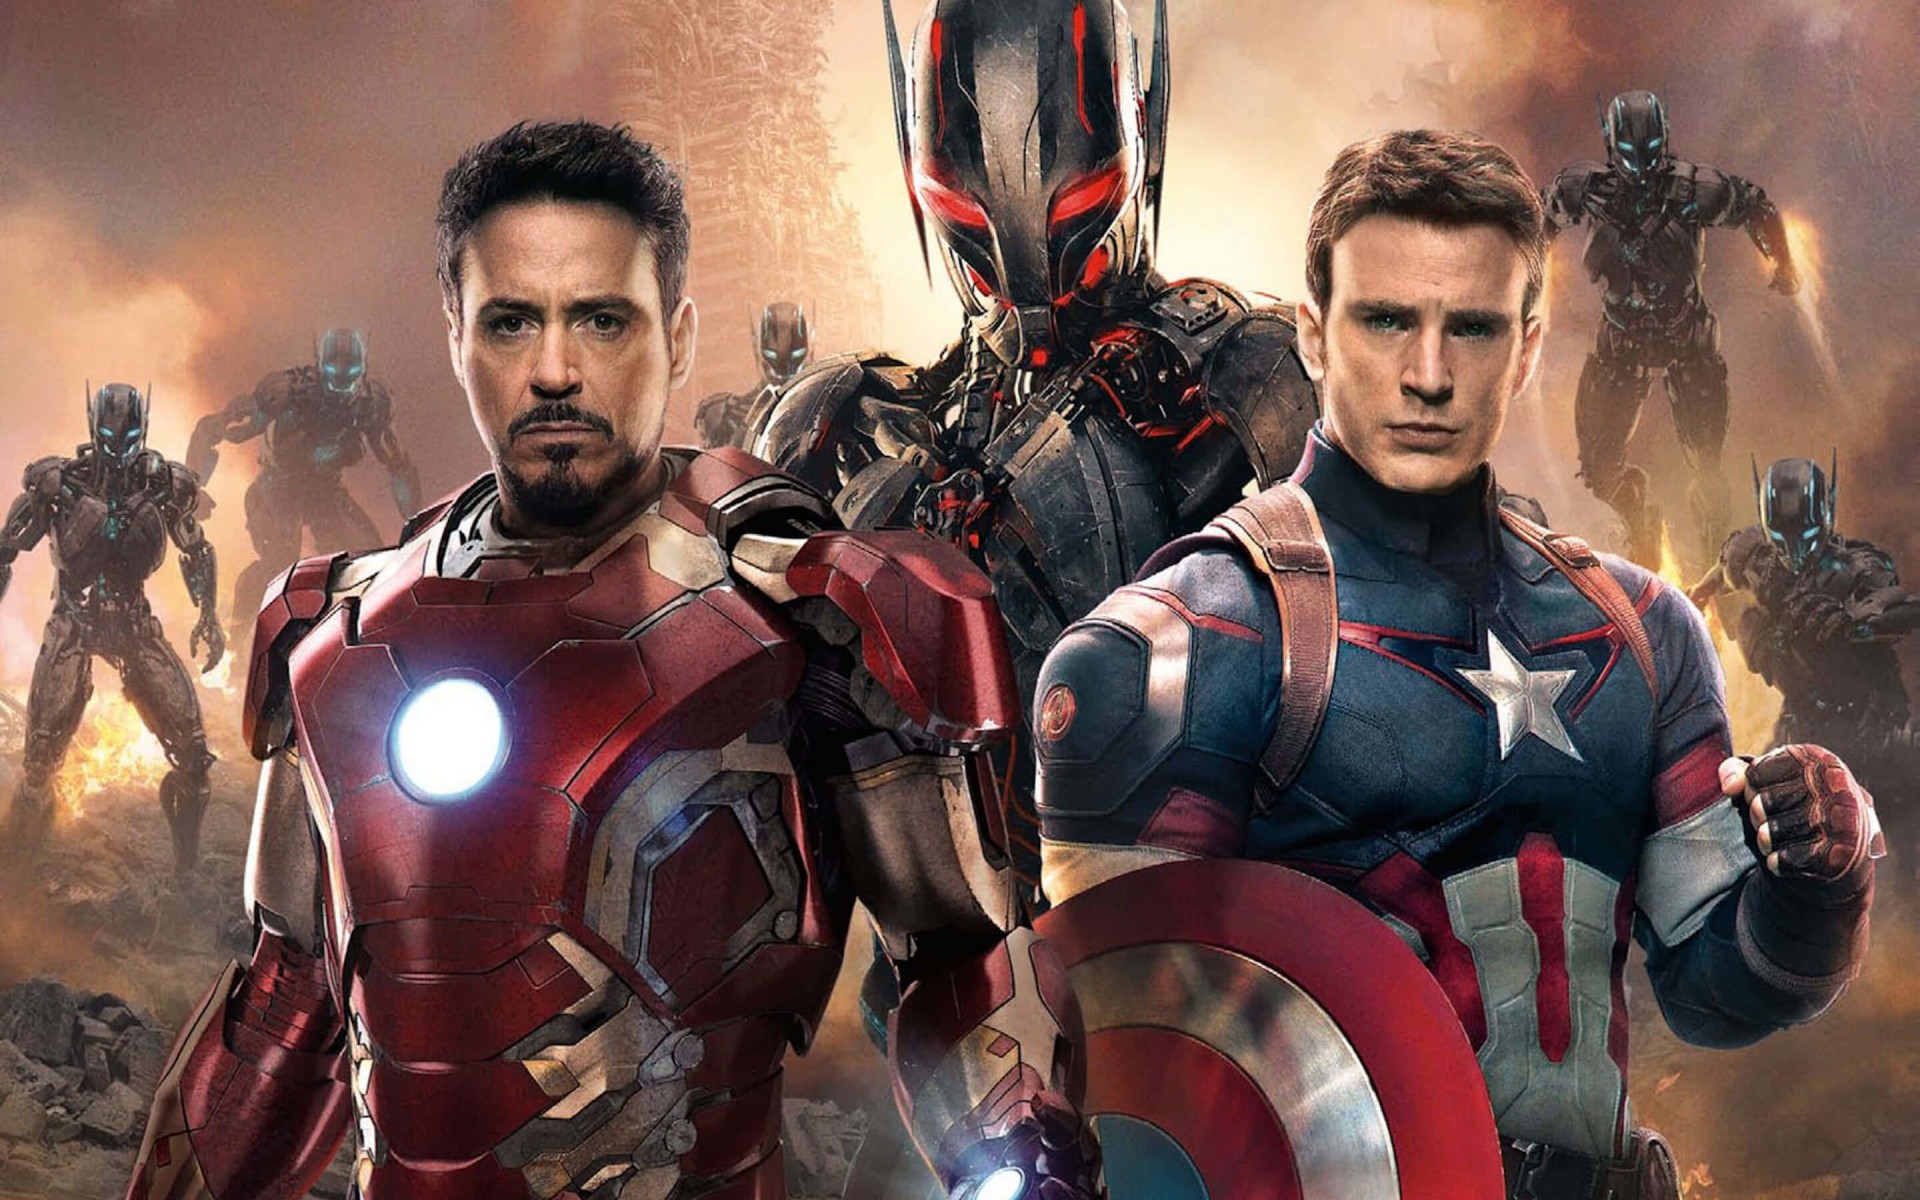 The Avengers: Age of Ultron - Iron Man and Captain America Wallpaper for Desktop 1920x1200